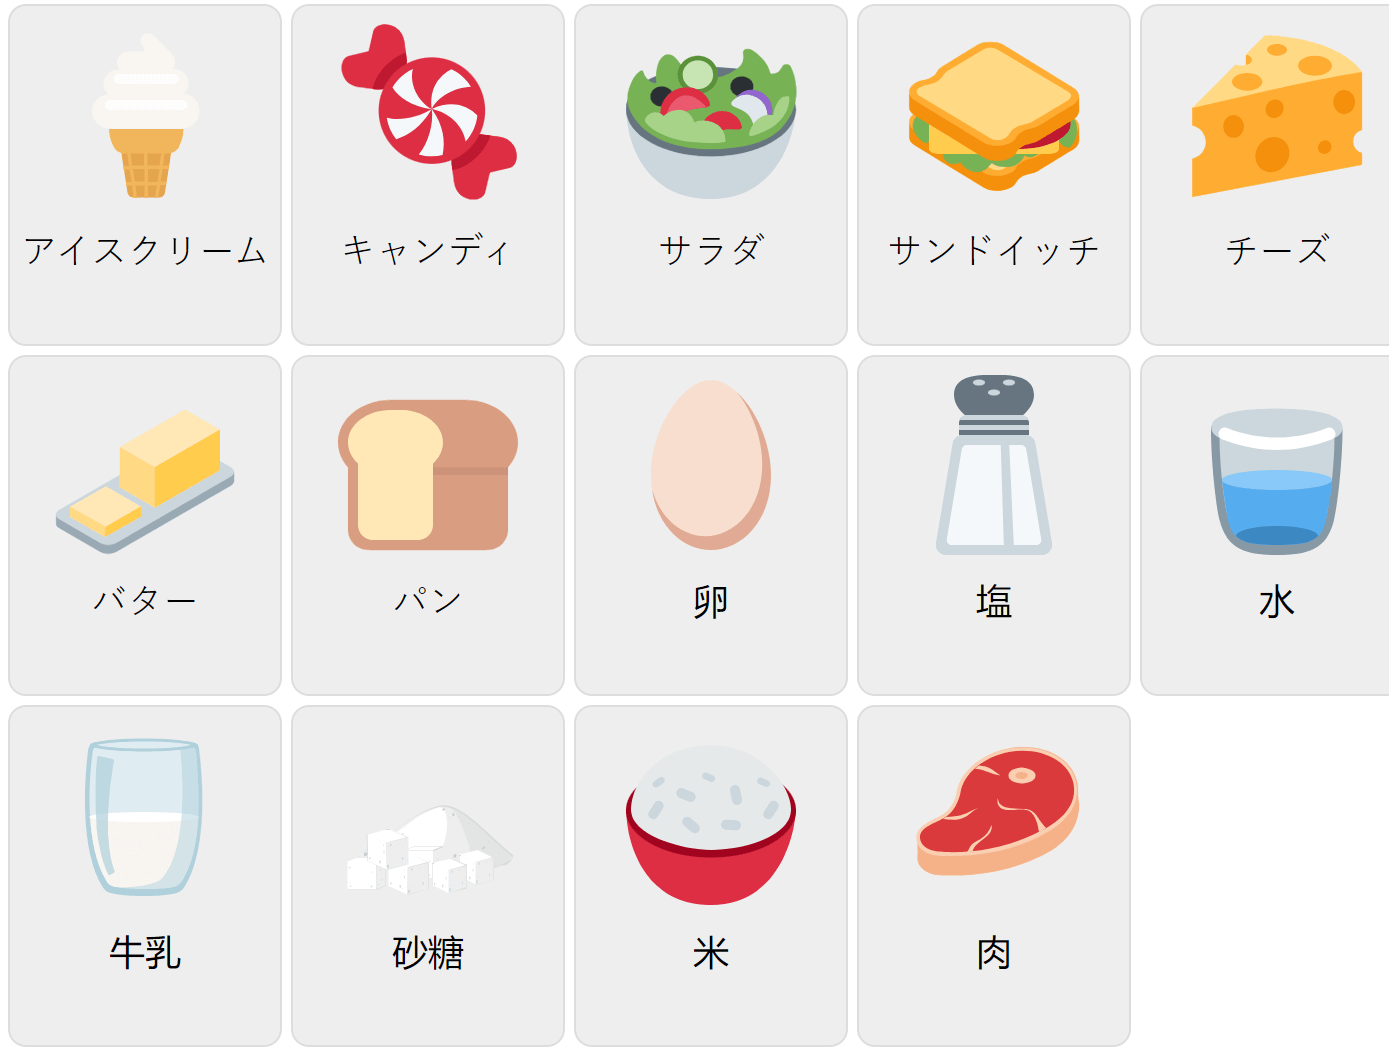 Food in Japanese 1